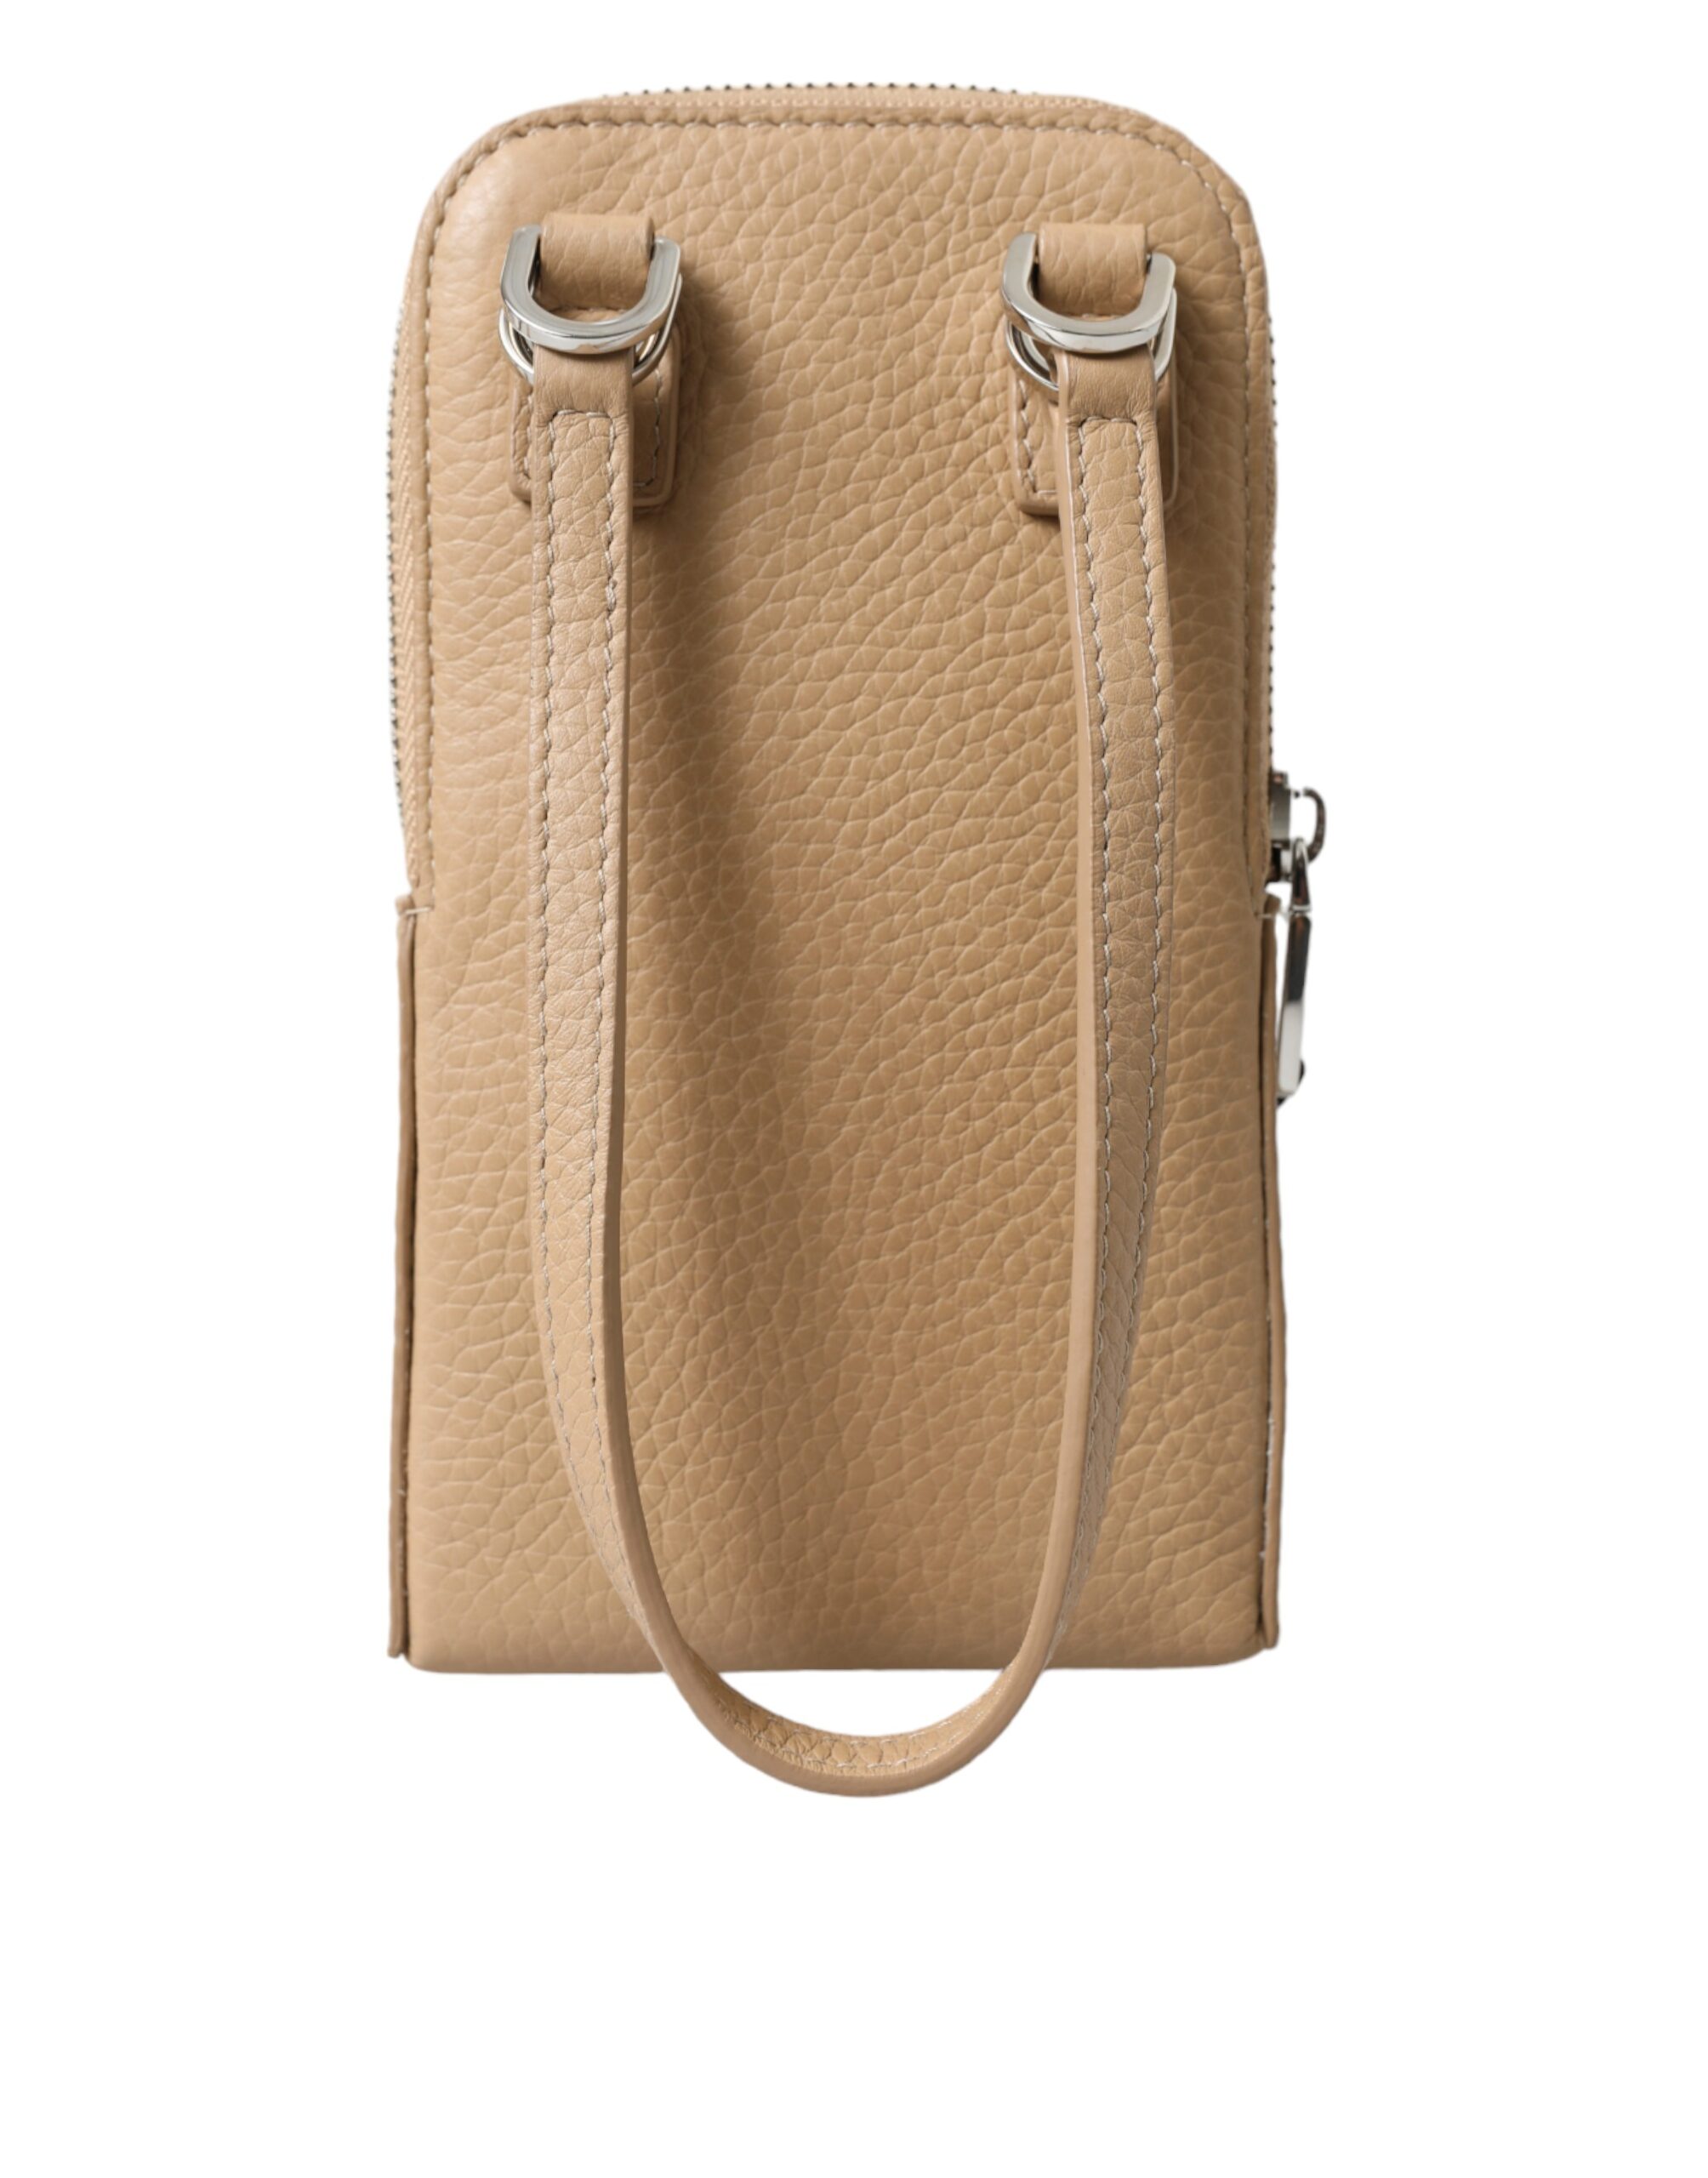 Leather Crossbody Phone Bag with Zipper Closure and Logo Details